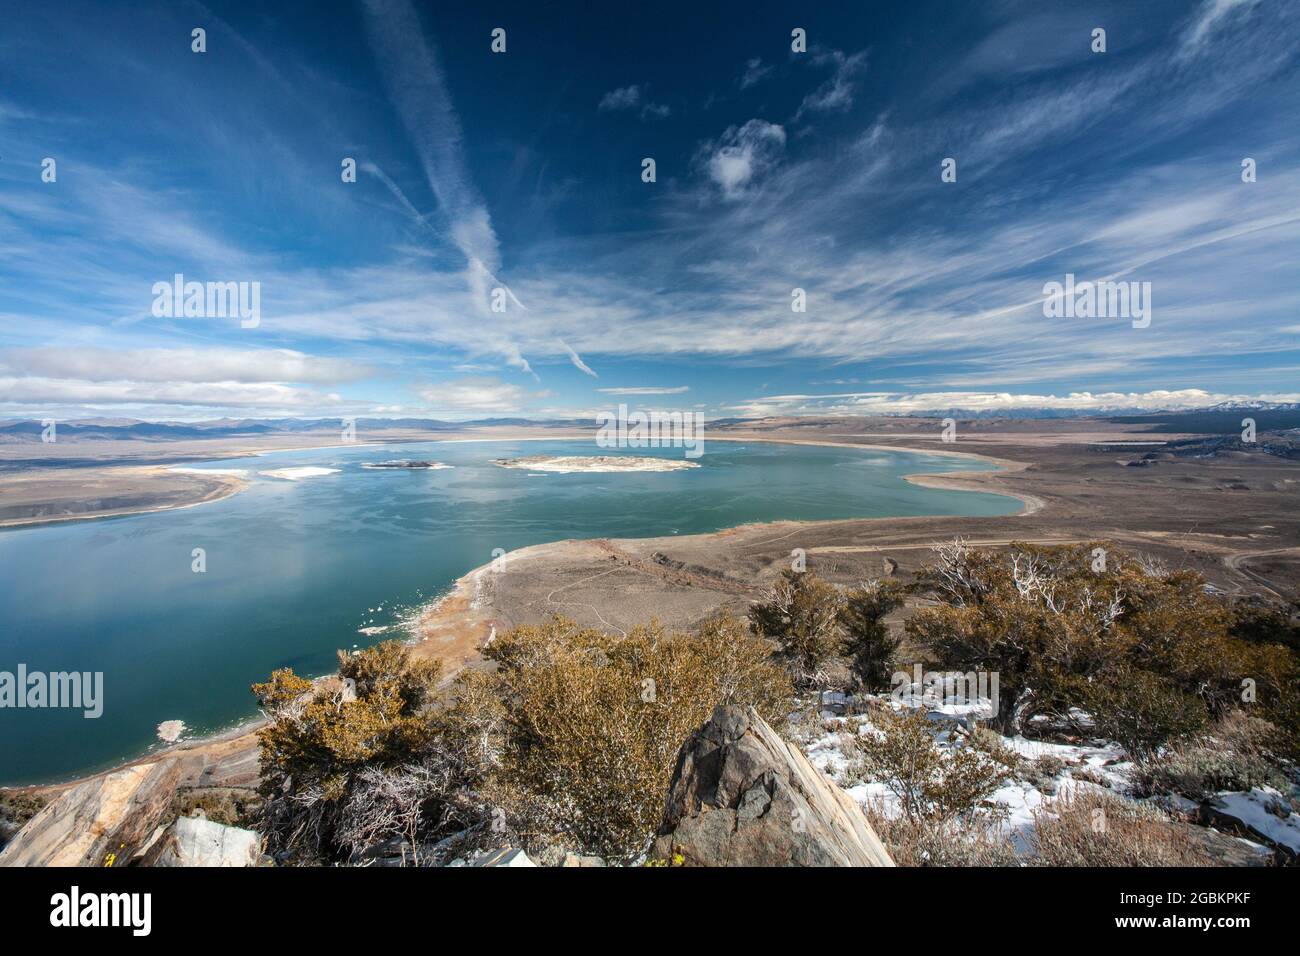 The Mono Basin of California with Mono Lake at its centre, is a landscape of unique aesthetic appeal and scientific interest. A National Scenic Area. Stock Photo